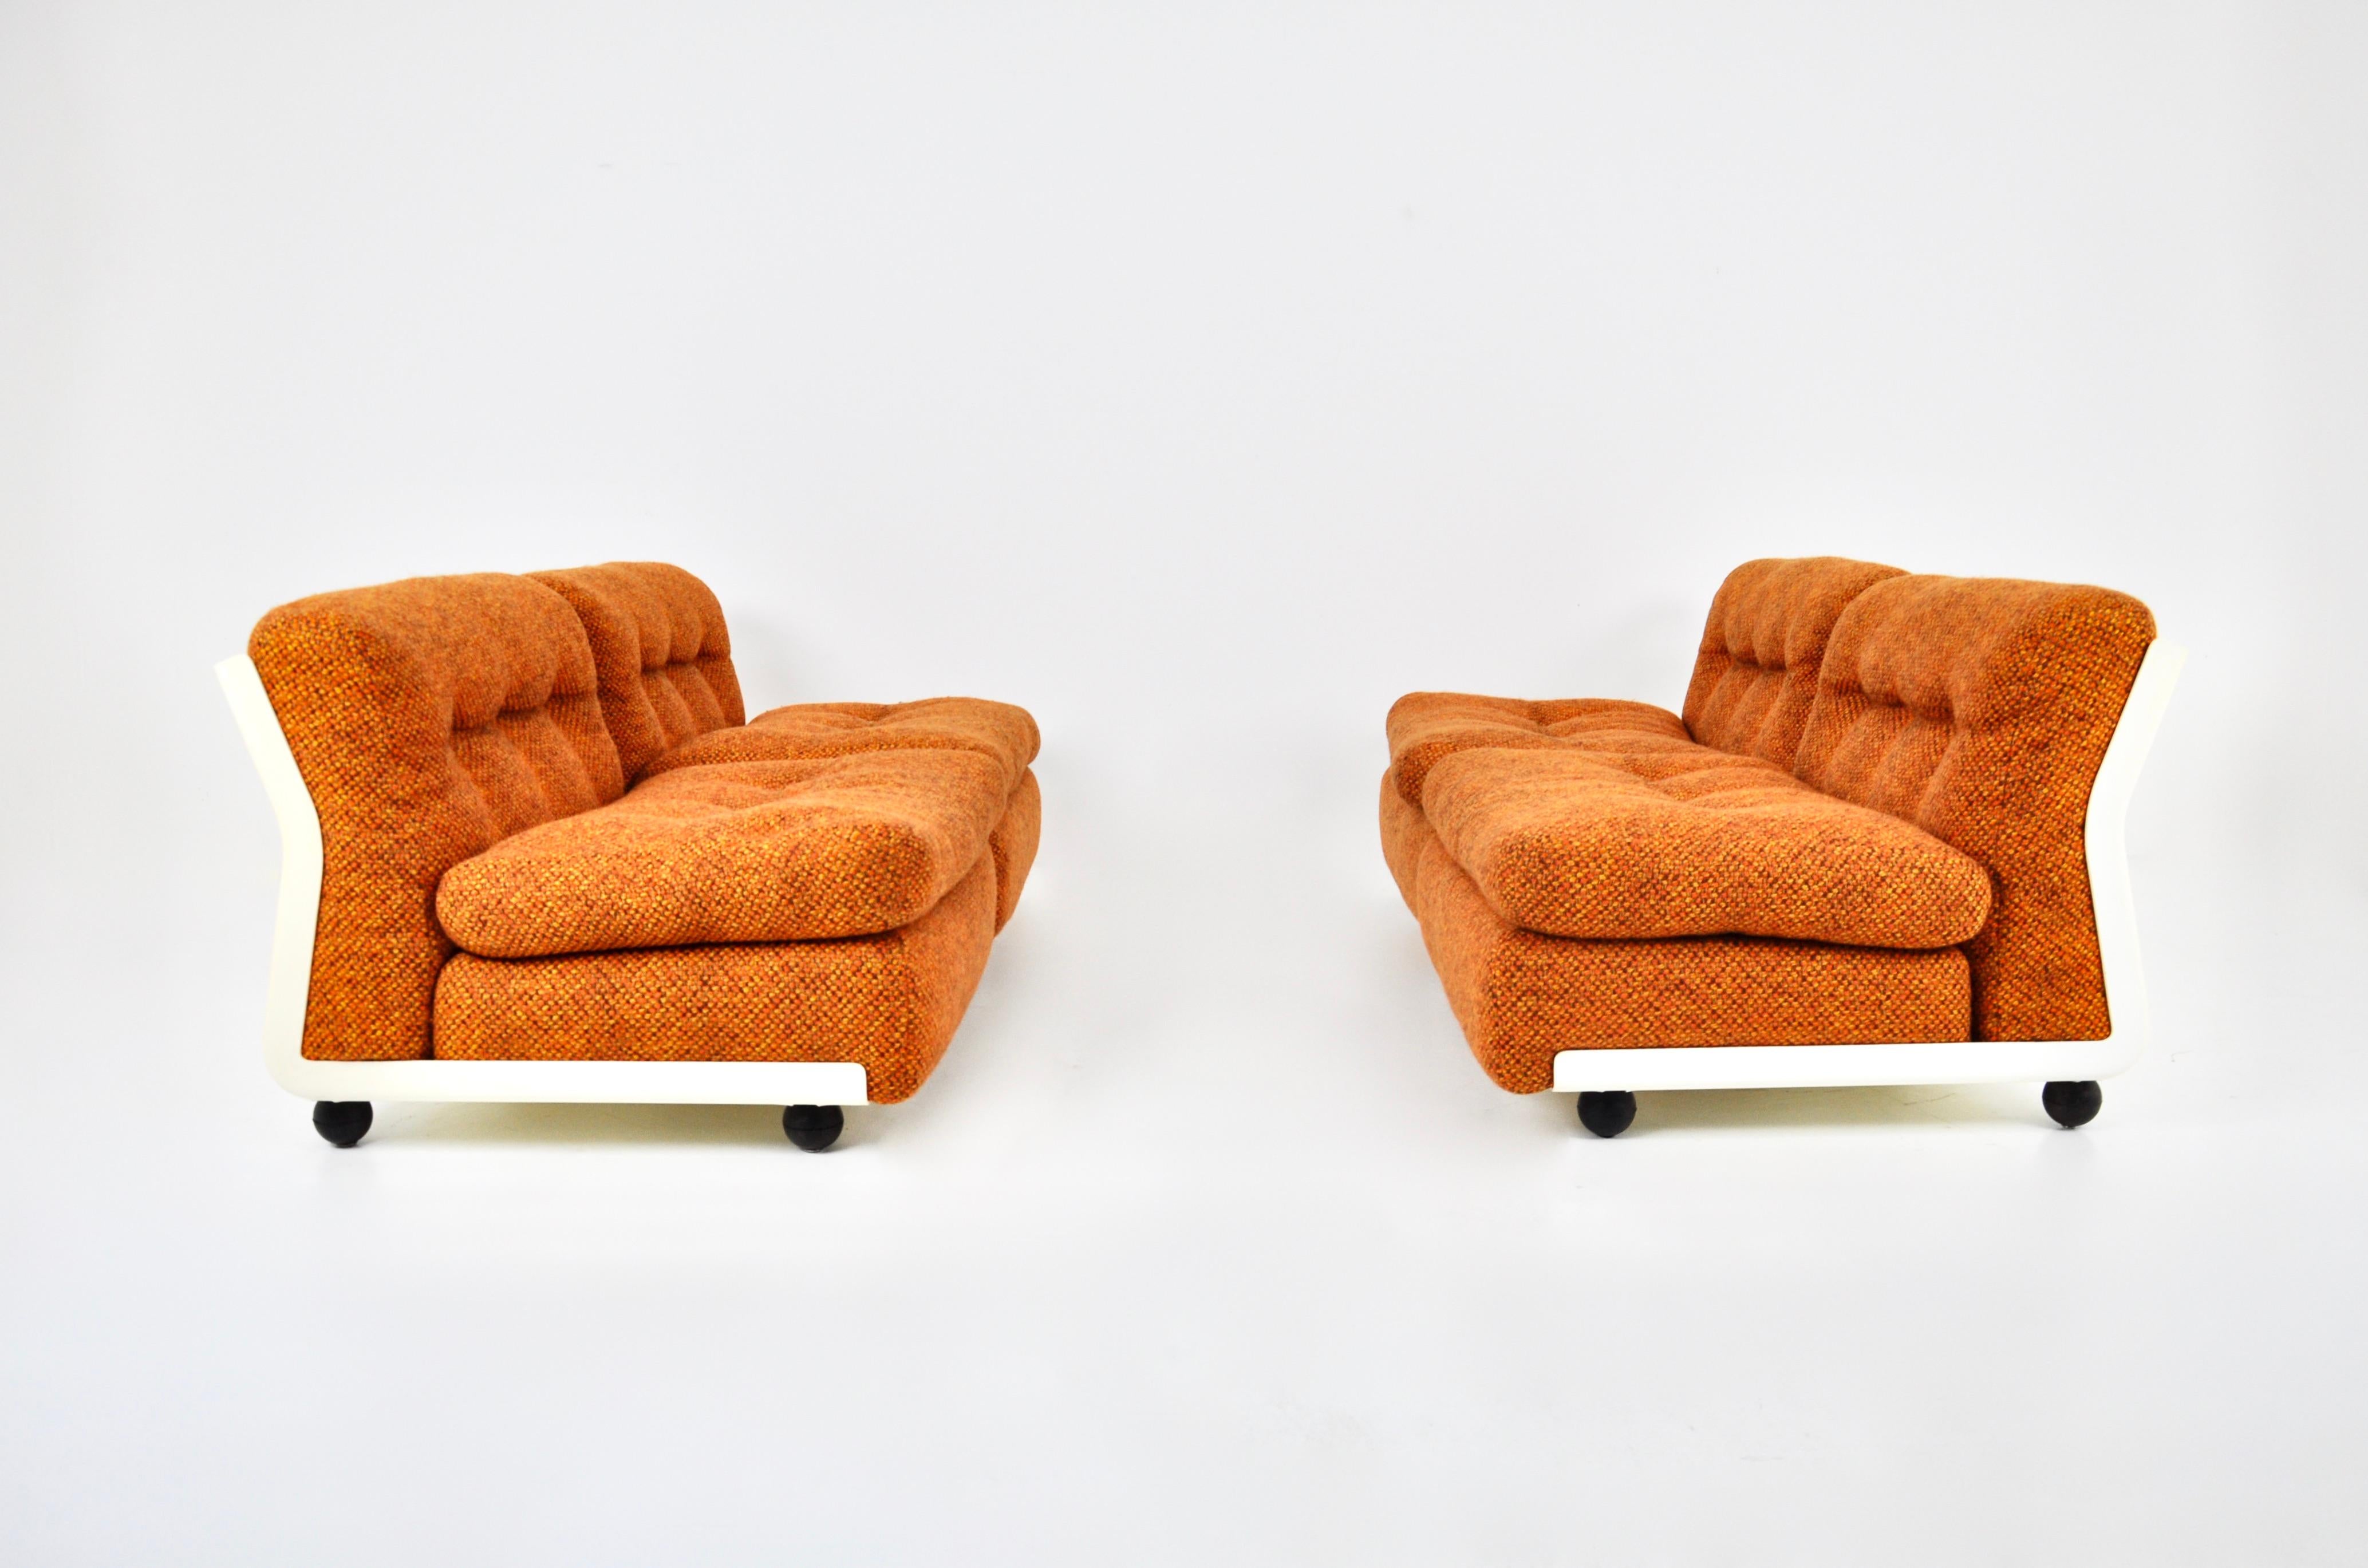 Amanta Lounge chairs by Mario Bellini for C&B Italia, 1960s, set of 4 For Sale 4